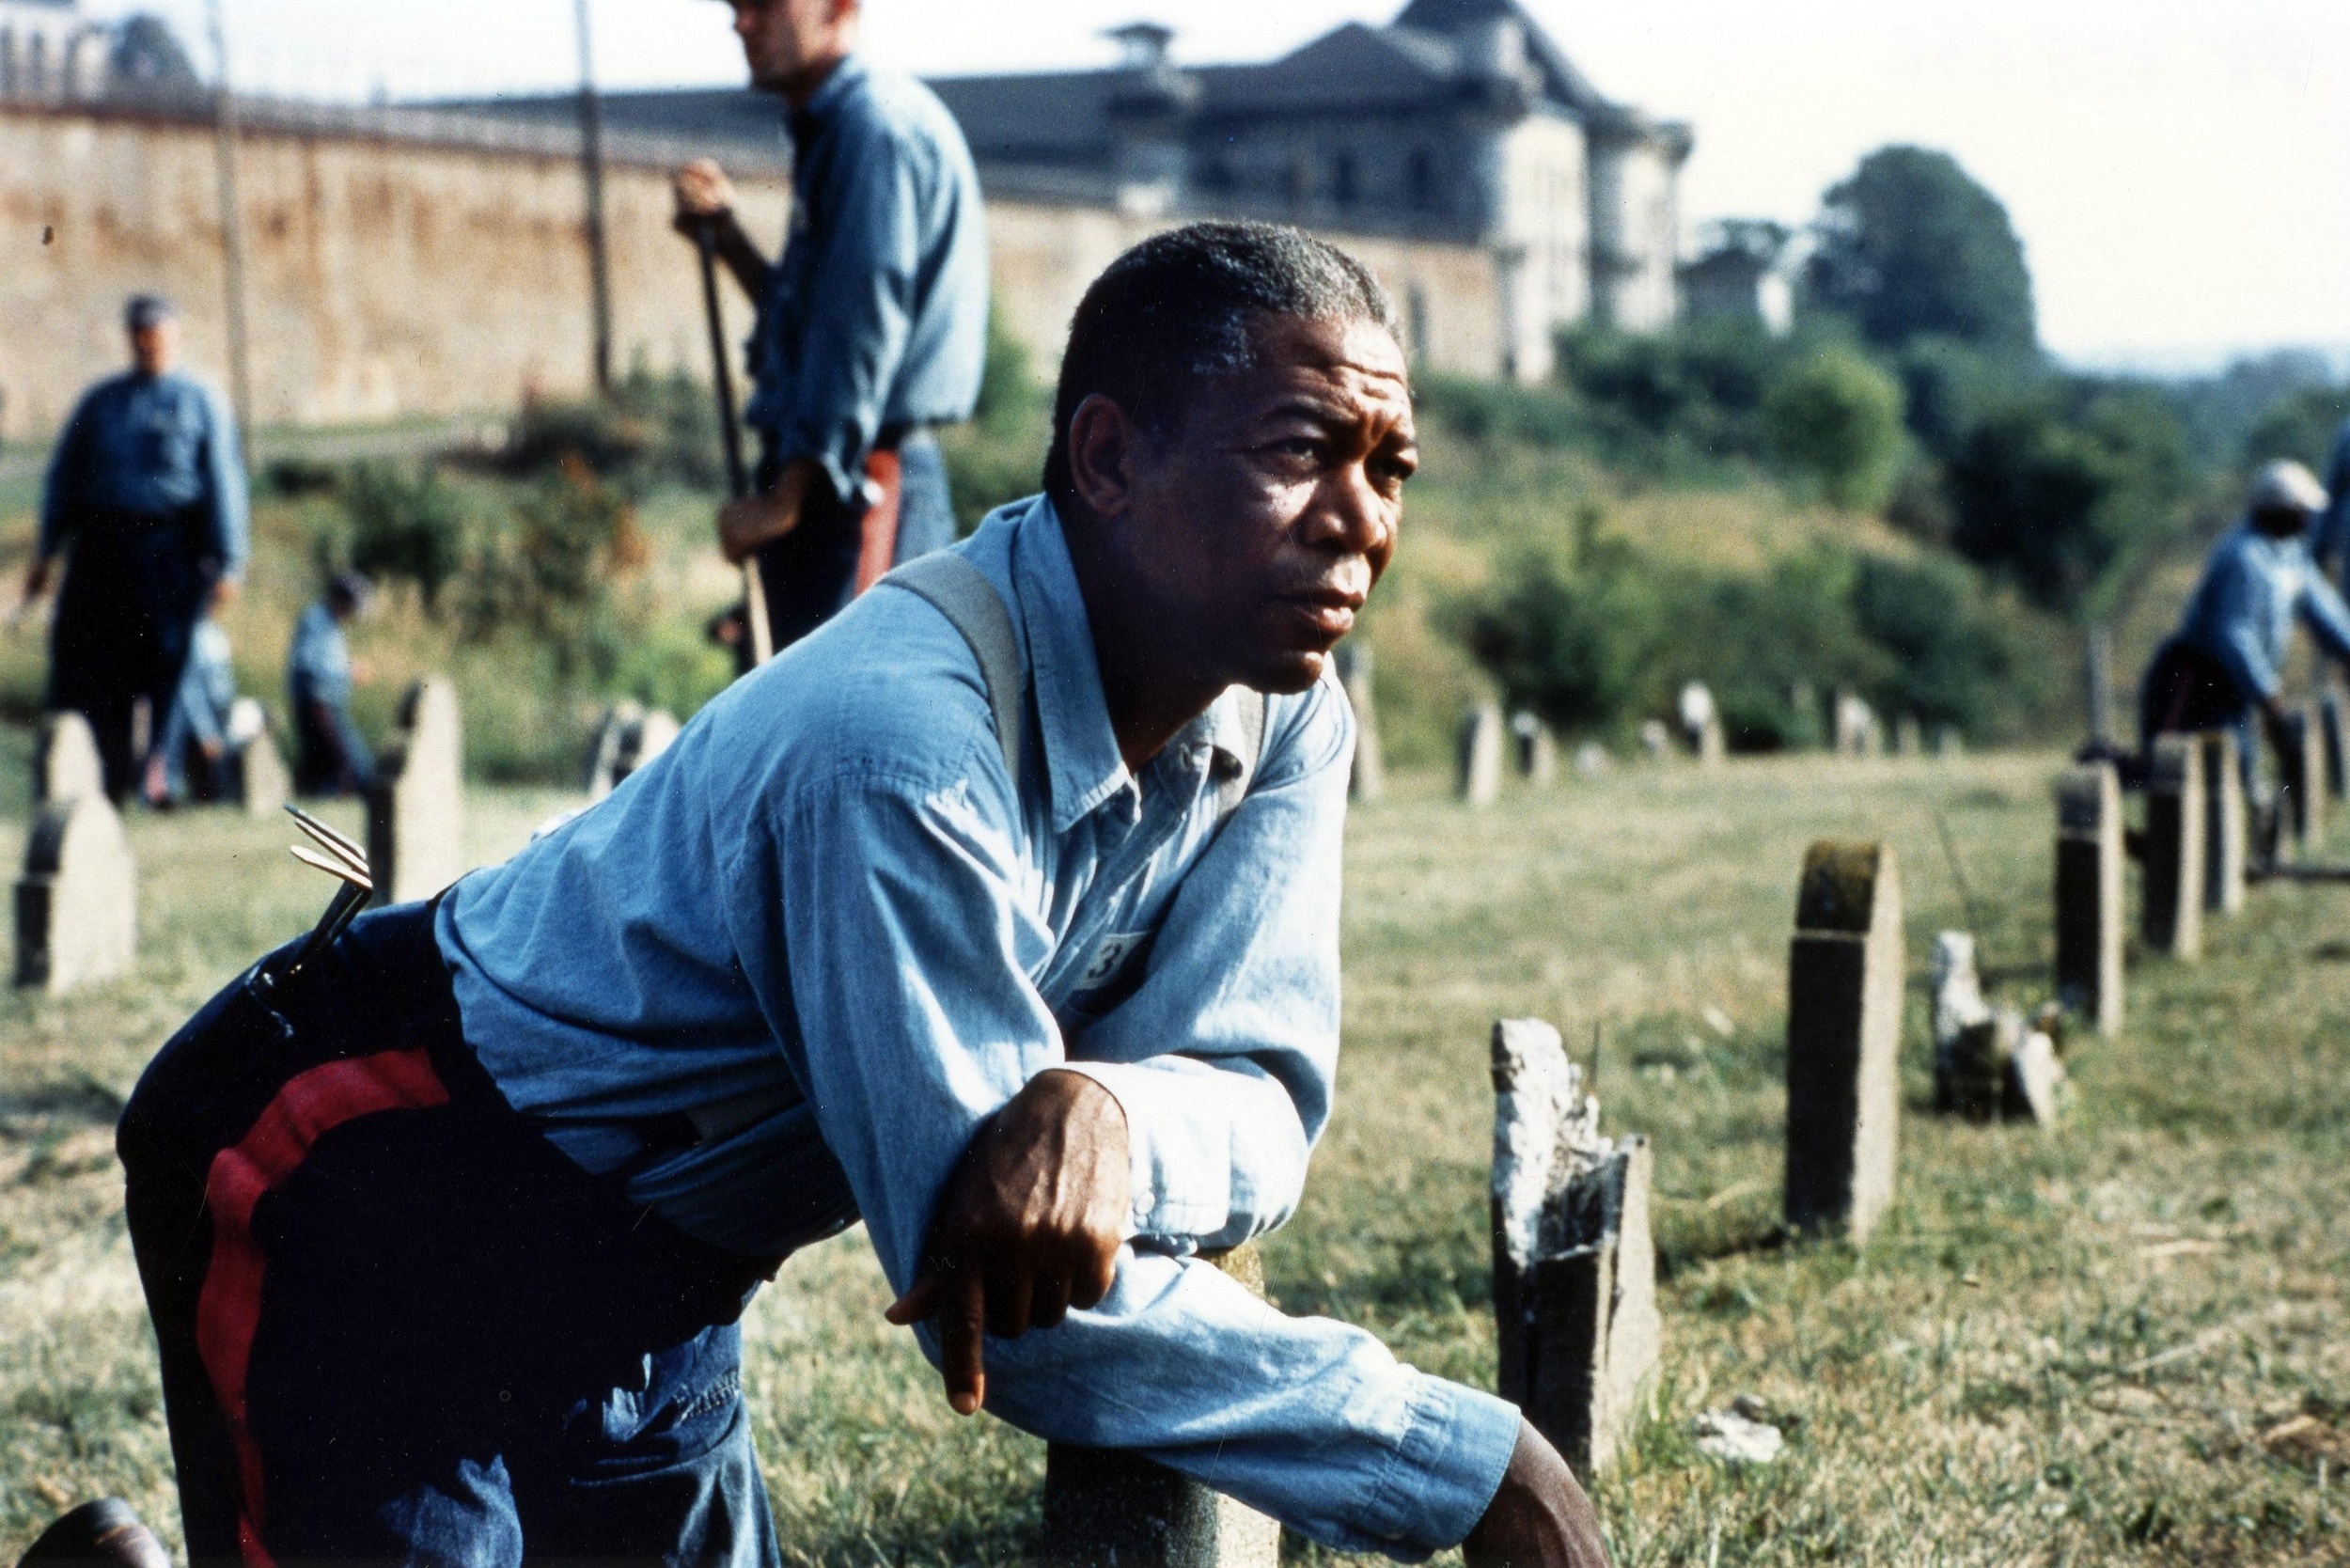 <p>Red does a lot of narrating in “Shawshank Redemption,” which is what you do when you cast Morgan Freeman (in a role that in the book is a white Irish guy). After Andy’s escape, Red is left to reflect on his complex emotions. This bit of narration ends somberly, if sweetly, with Red saying, “I guess I just miss my friend.”</p><p>You may also like: <a href='https://www.yardbarker.com/entertainment/articles/the_best_canadian_rock_bands_of_all_time/s1__37691537'>The best Canadian rock bands of all time</a></p>